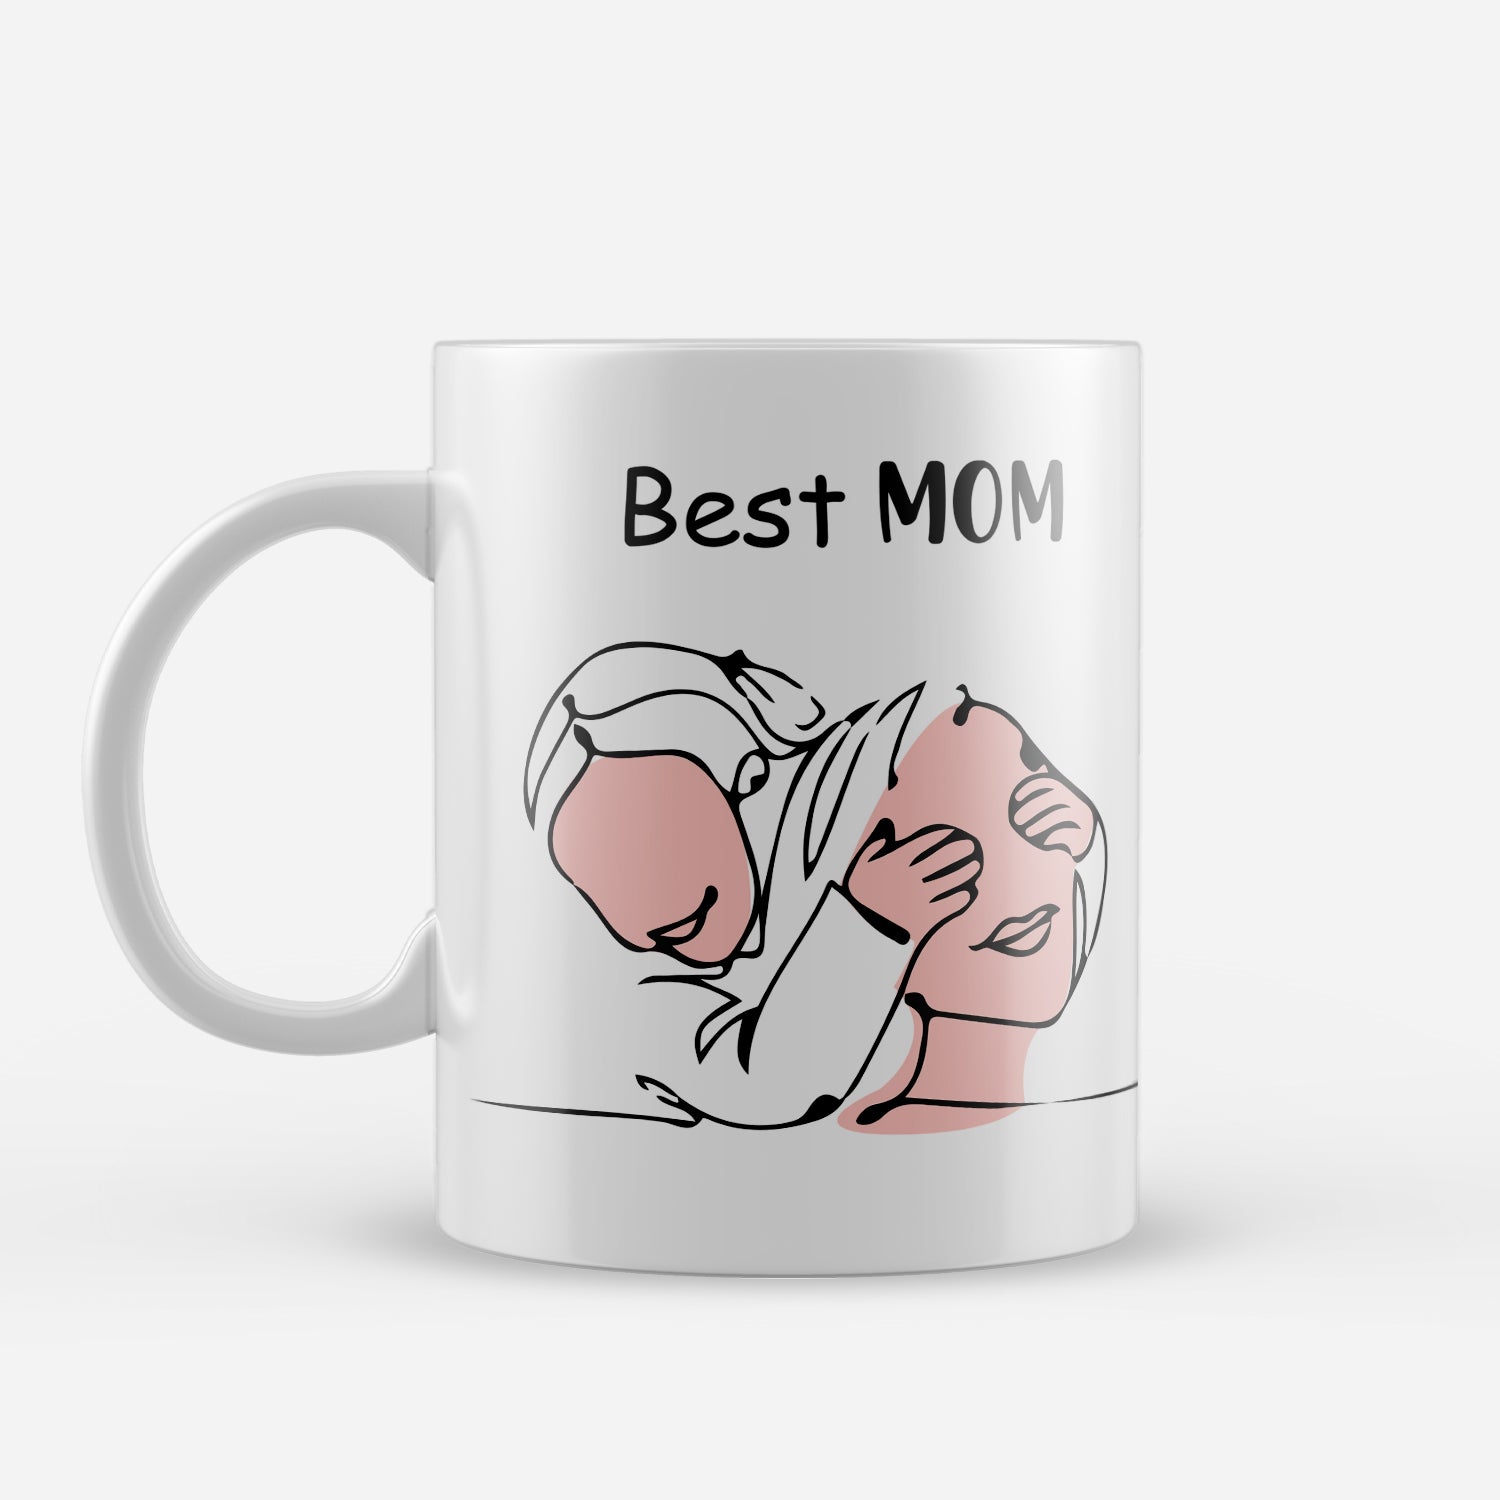 "Best MOM" Mother's Day theme Ceramic Coffee Mugs 2